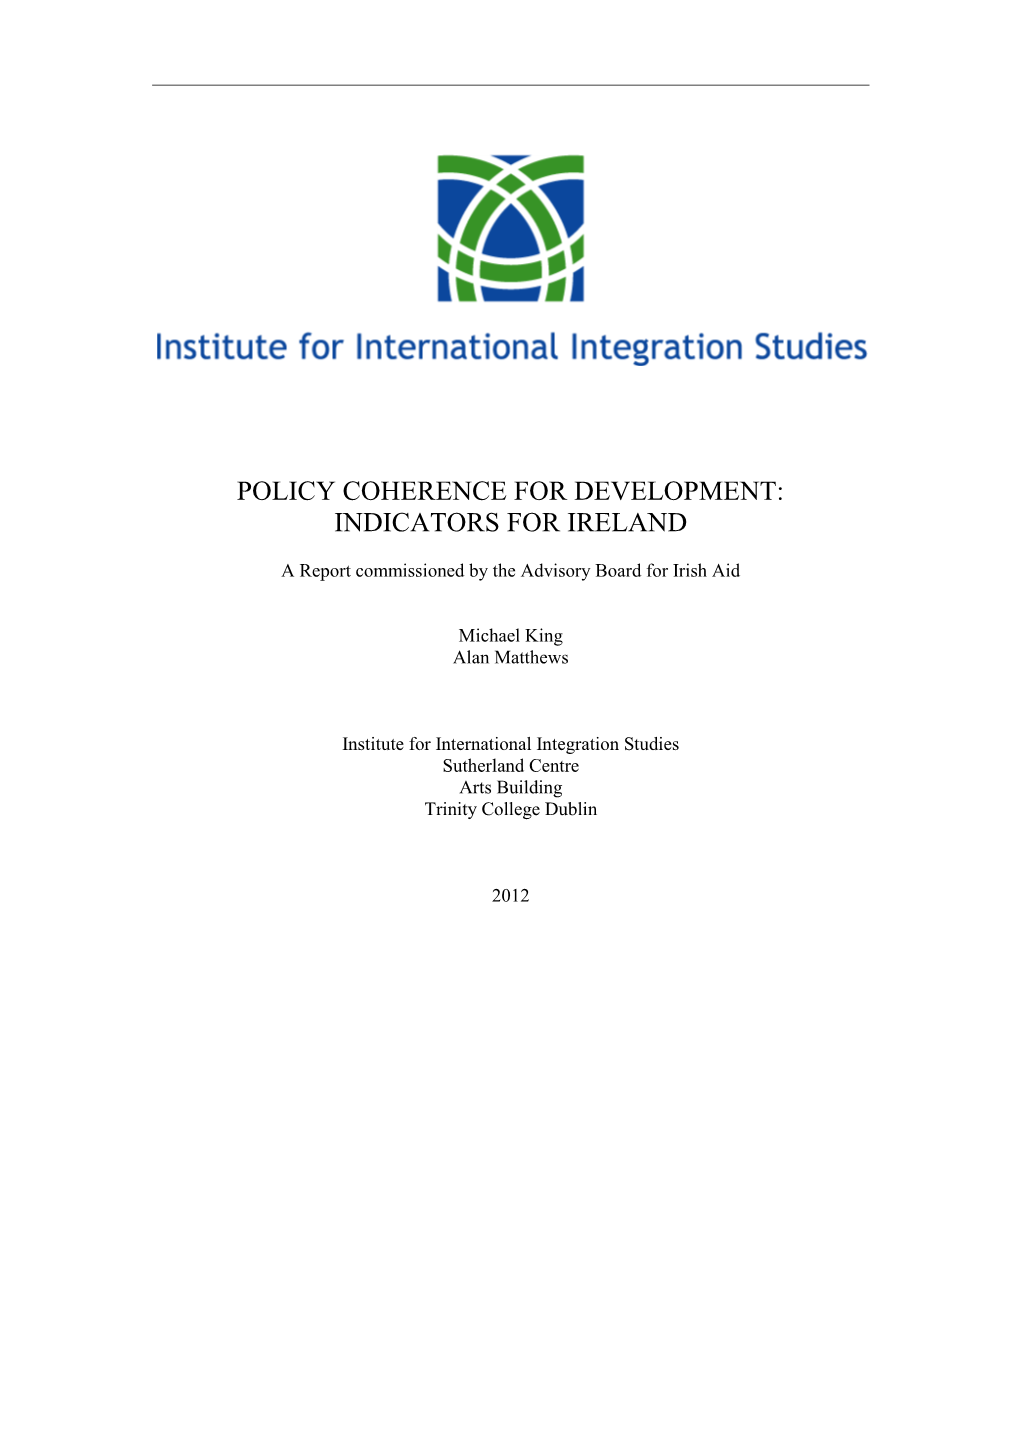 Policy Coherence for Development: Indicators for Ireland